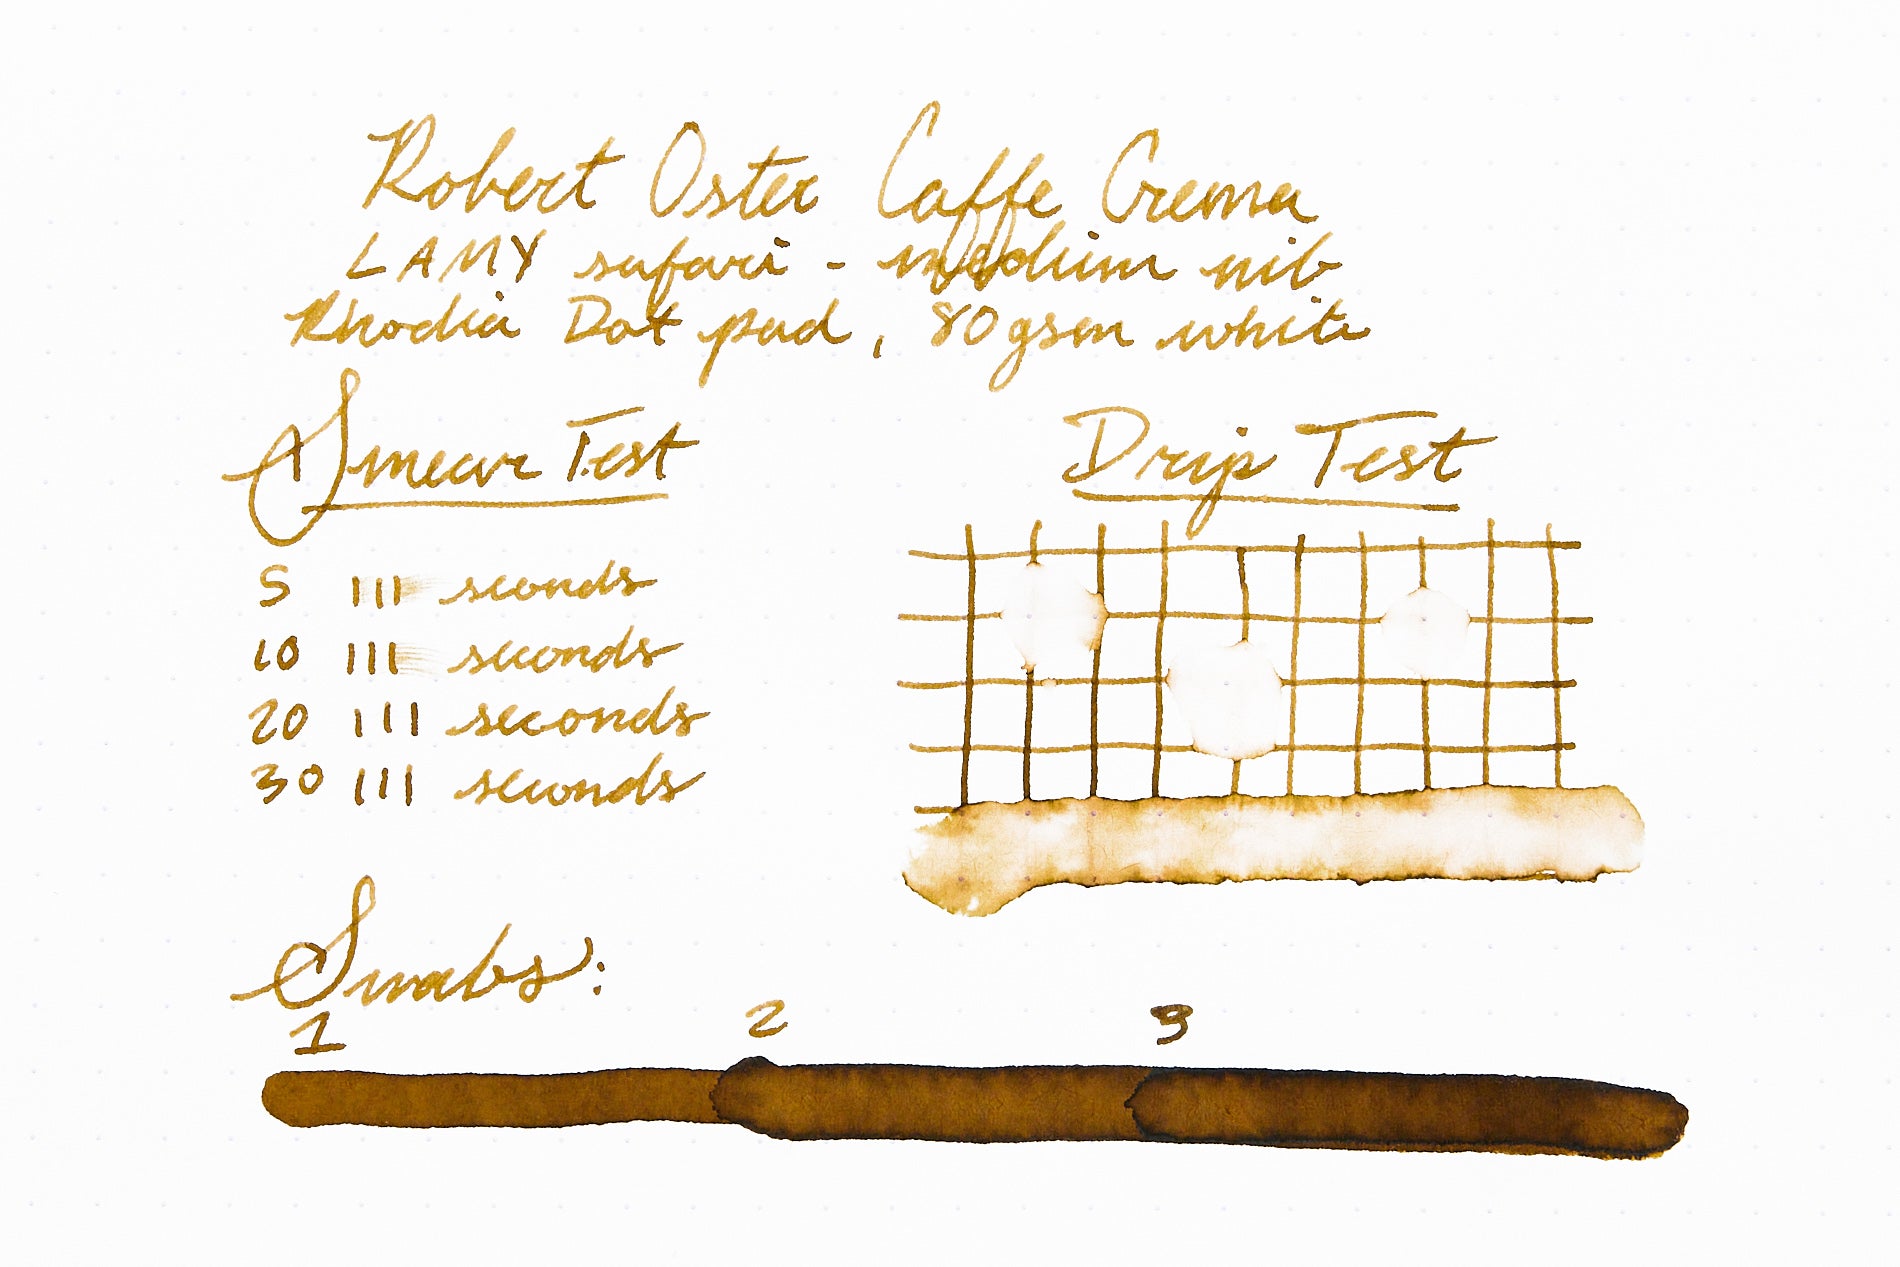 Robert Oster Caffe Crema fountain pen ink writing sample on white dot grid paper